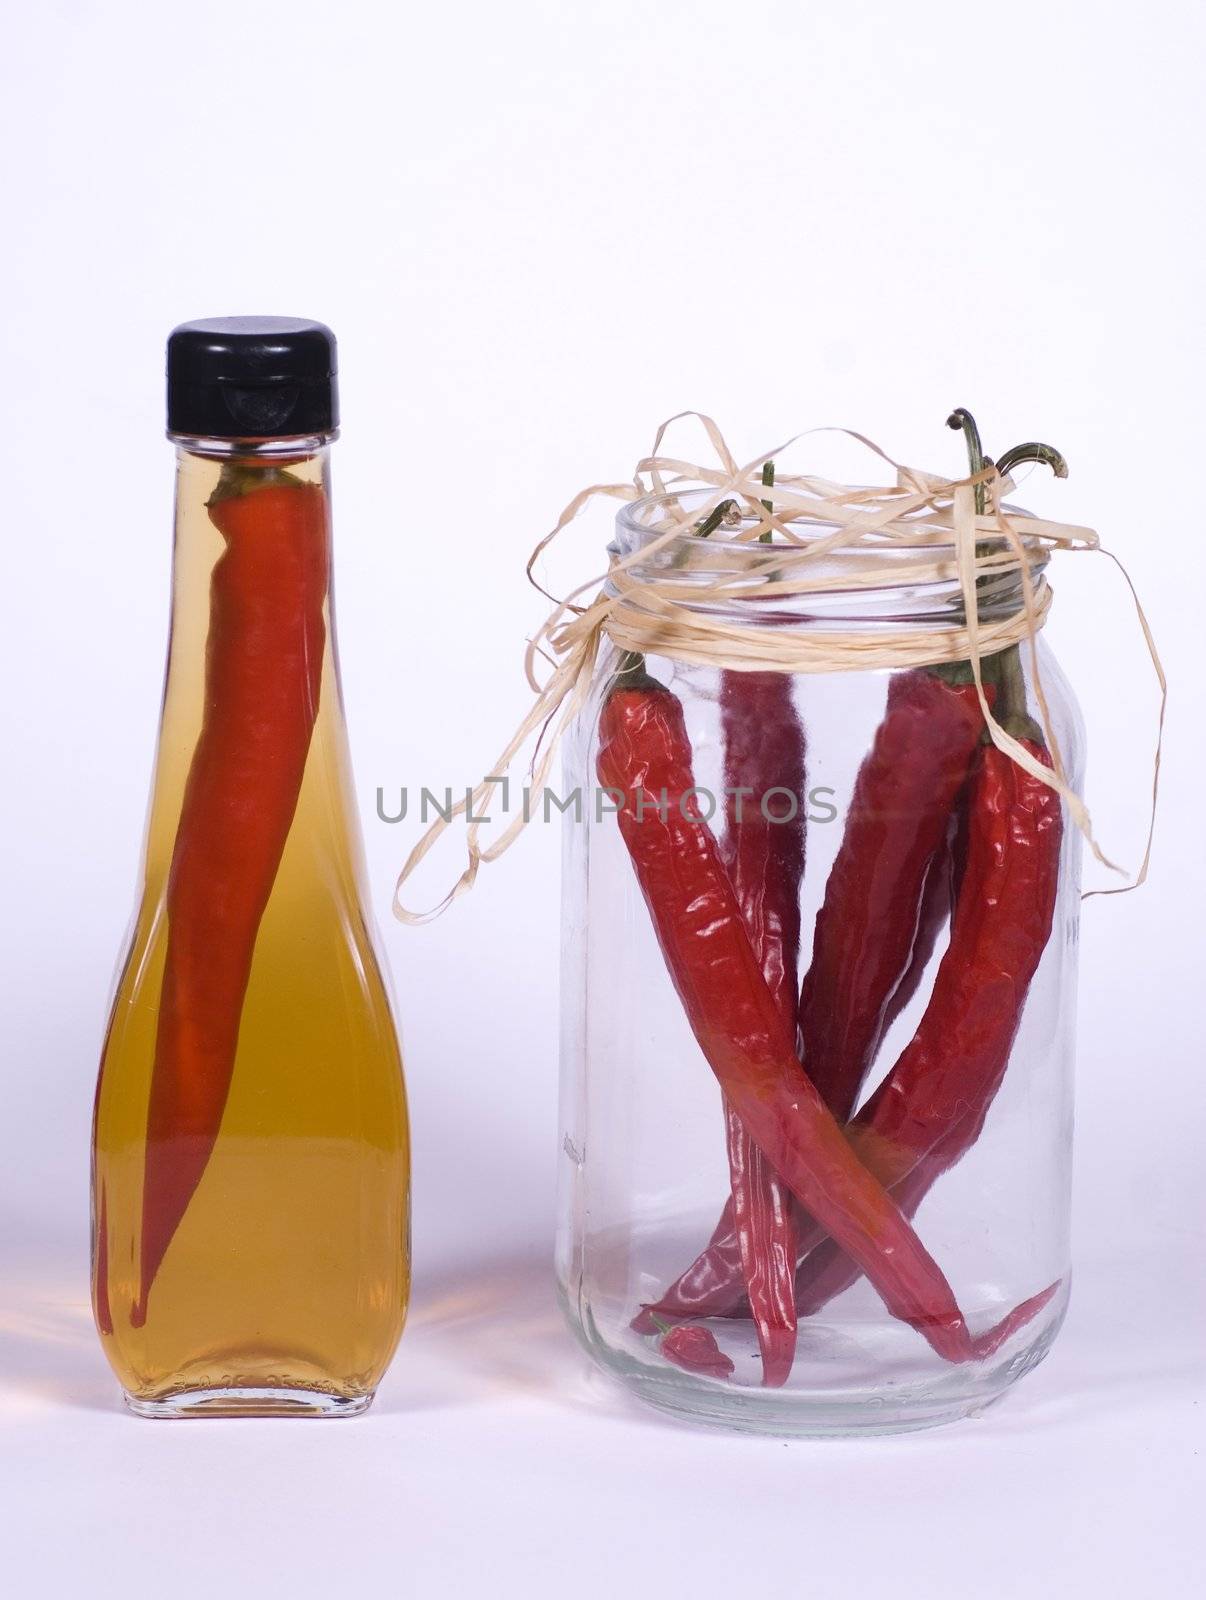 Flasks of Olive Oil and Red Chilli Peppers In Jar